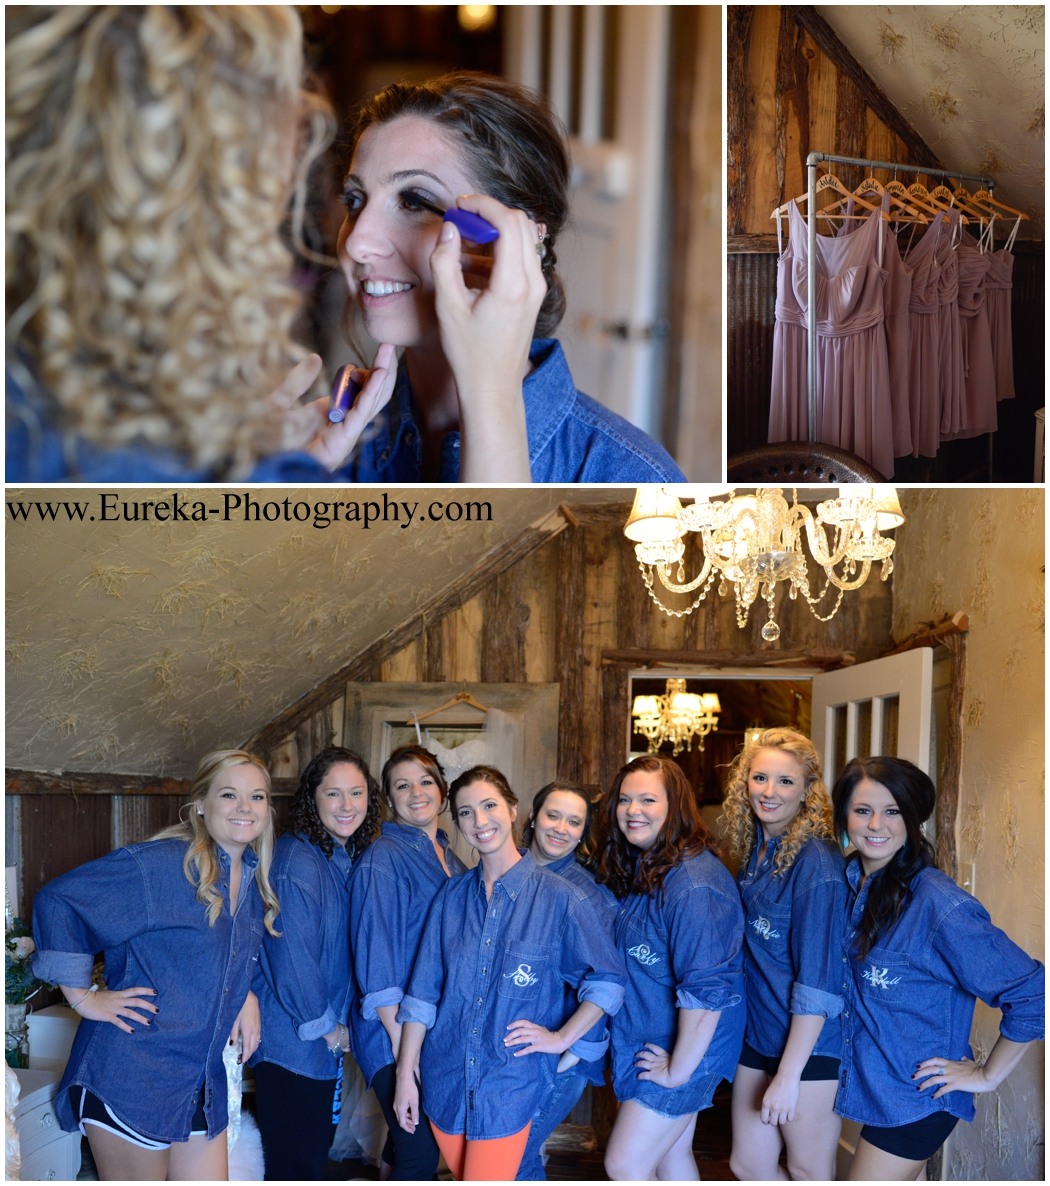 Matching denim shirts for bridesmaids at country wedding in Texas